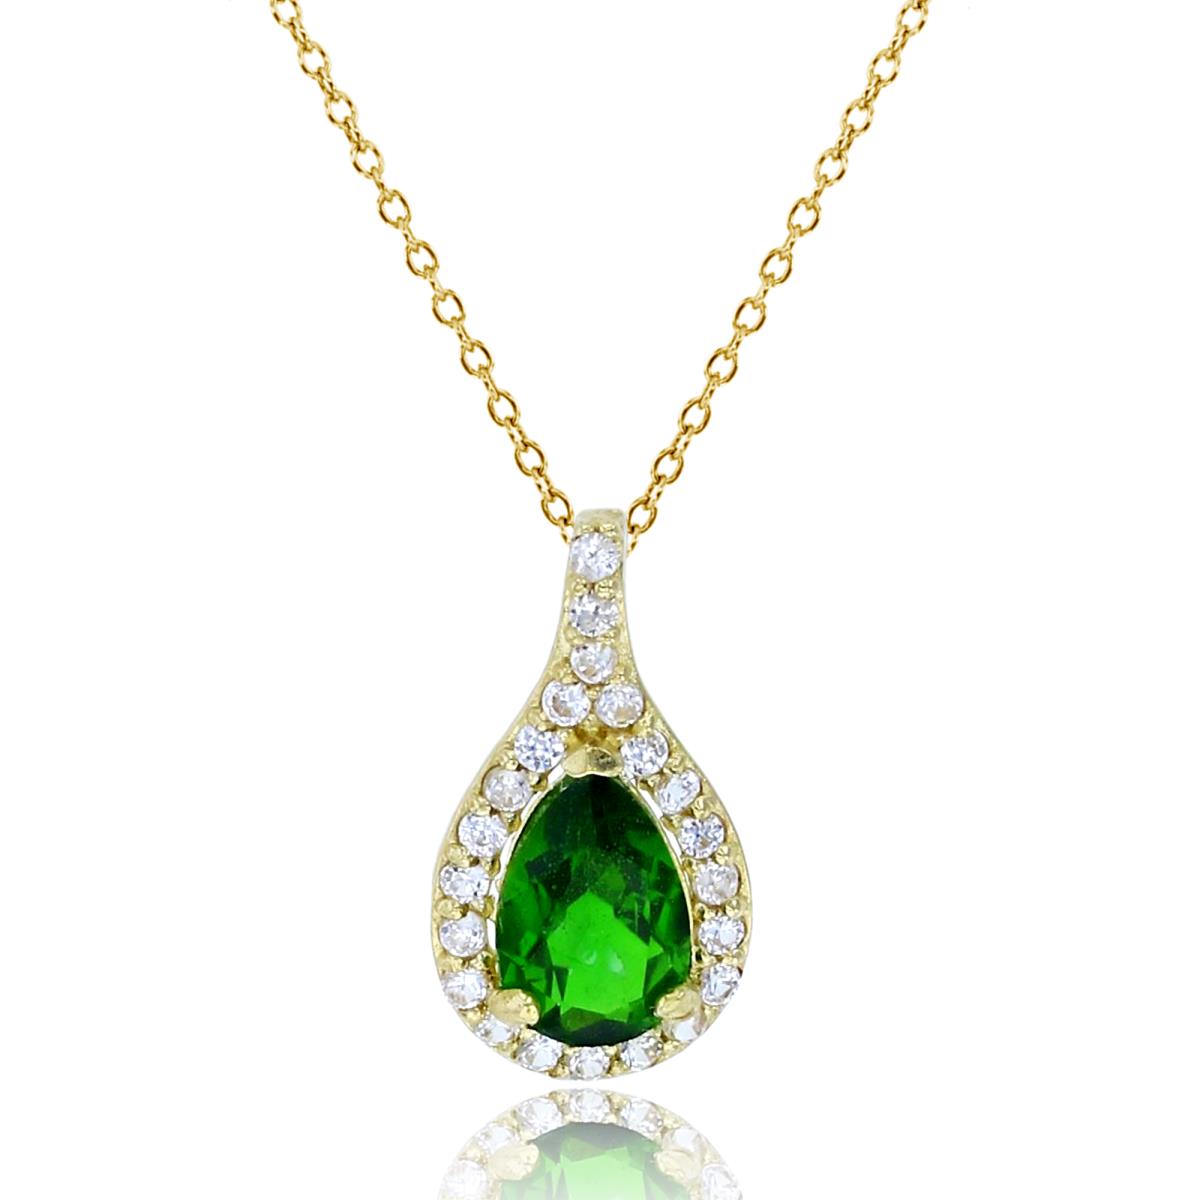 10K Yellow Gold 6x4mm PS Chrom Diopside & Wh.Zircon Pear Halo 18"Necklace